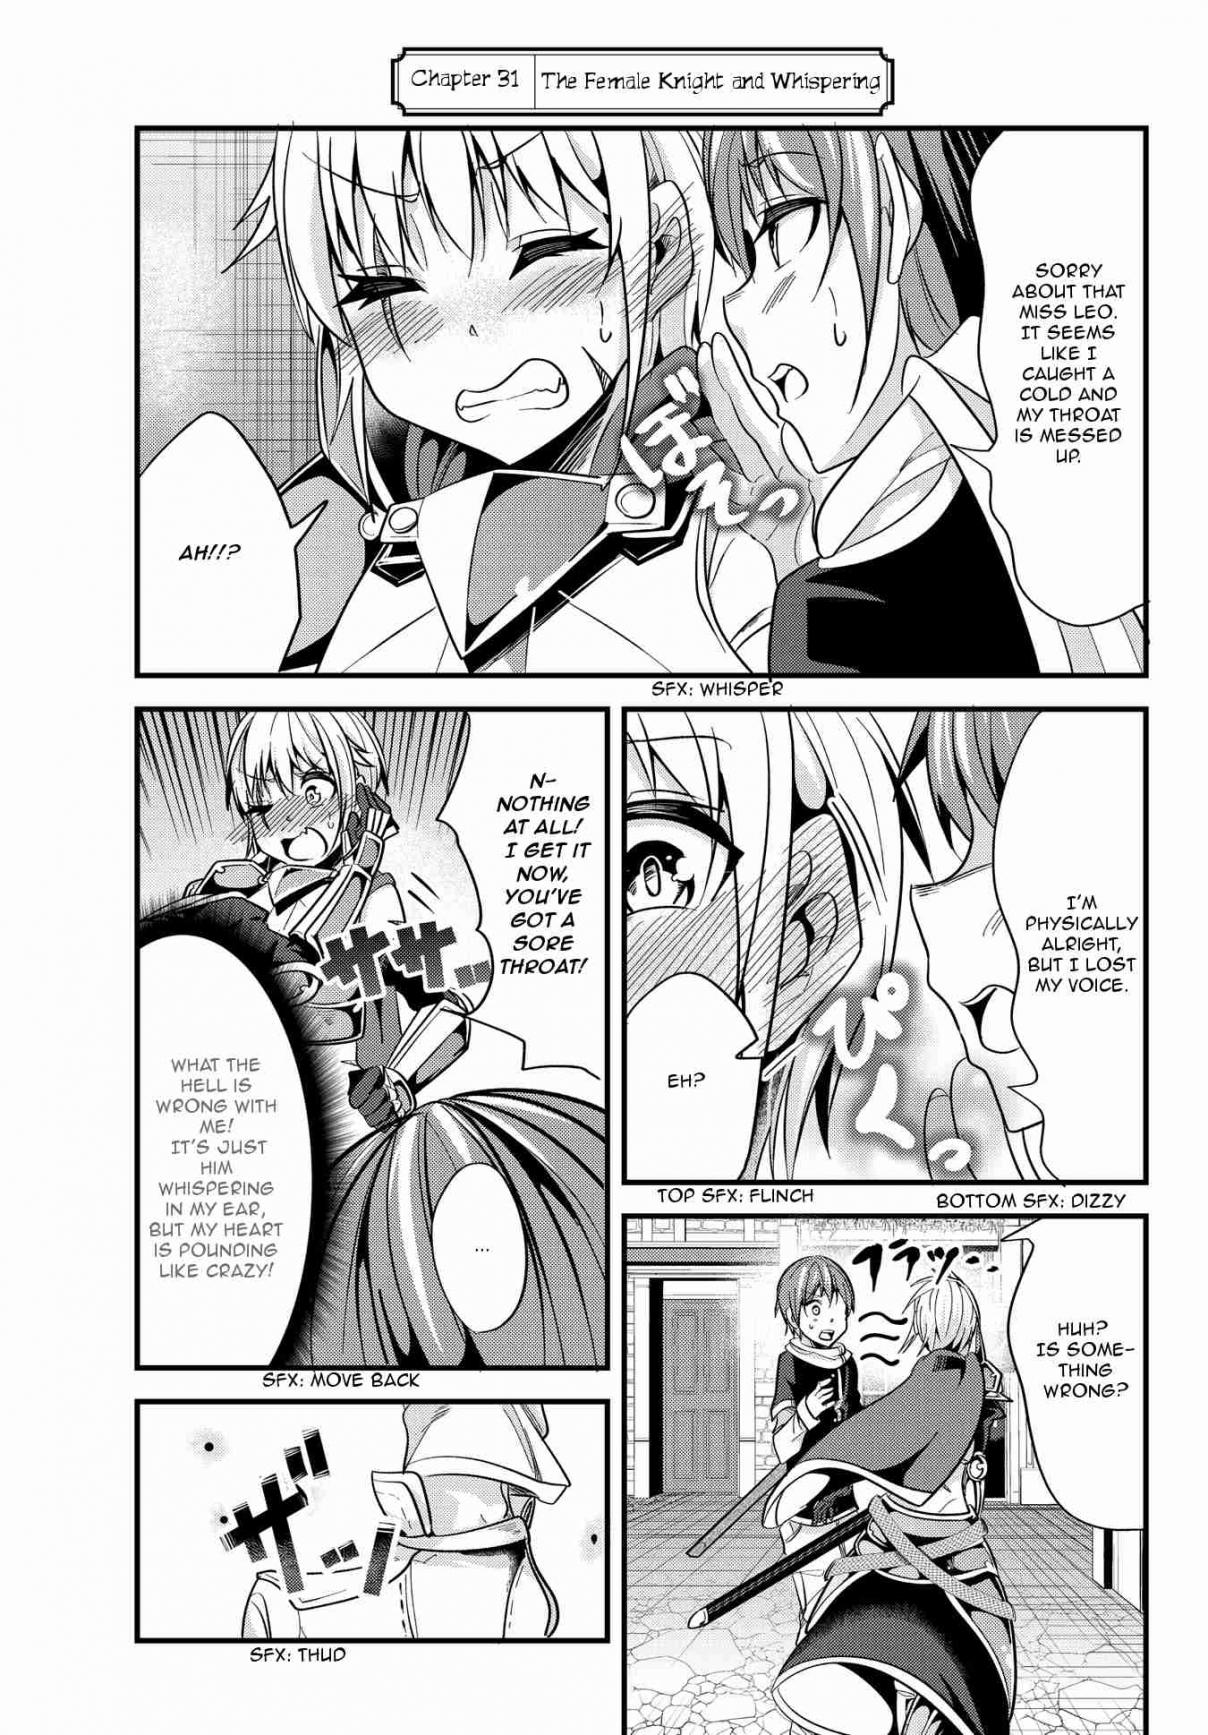 A Story About Treating a Female Knight, Who Has Never Been Treated as a Woman, as a Woman Ch. 31 The Female Knight and Whispering